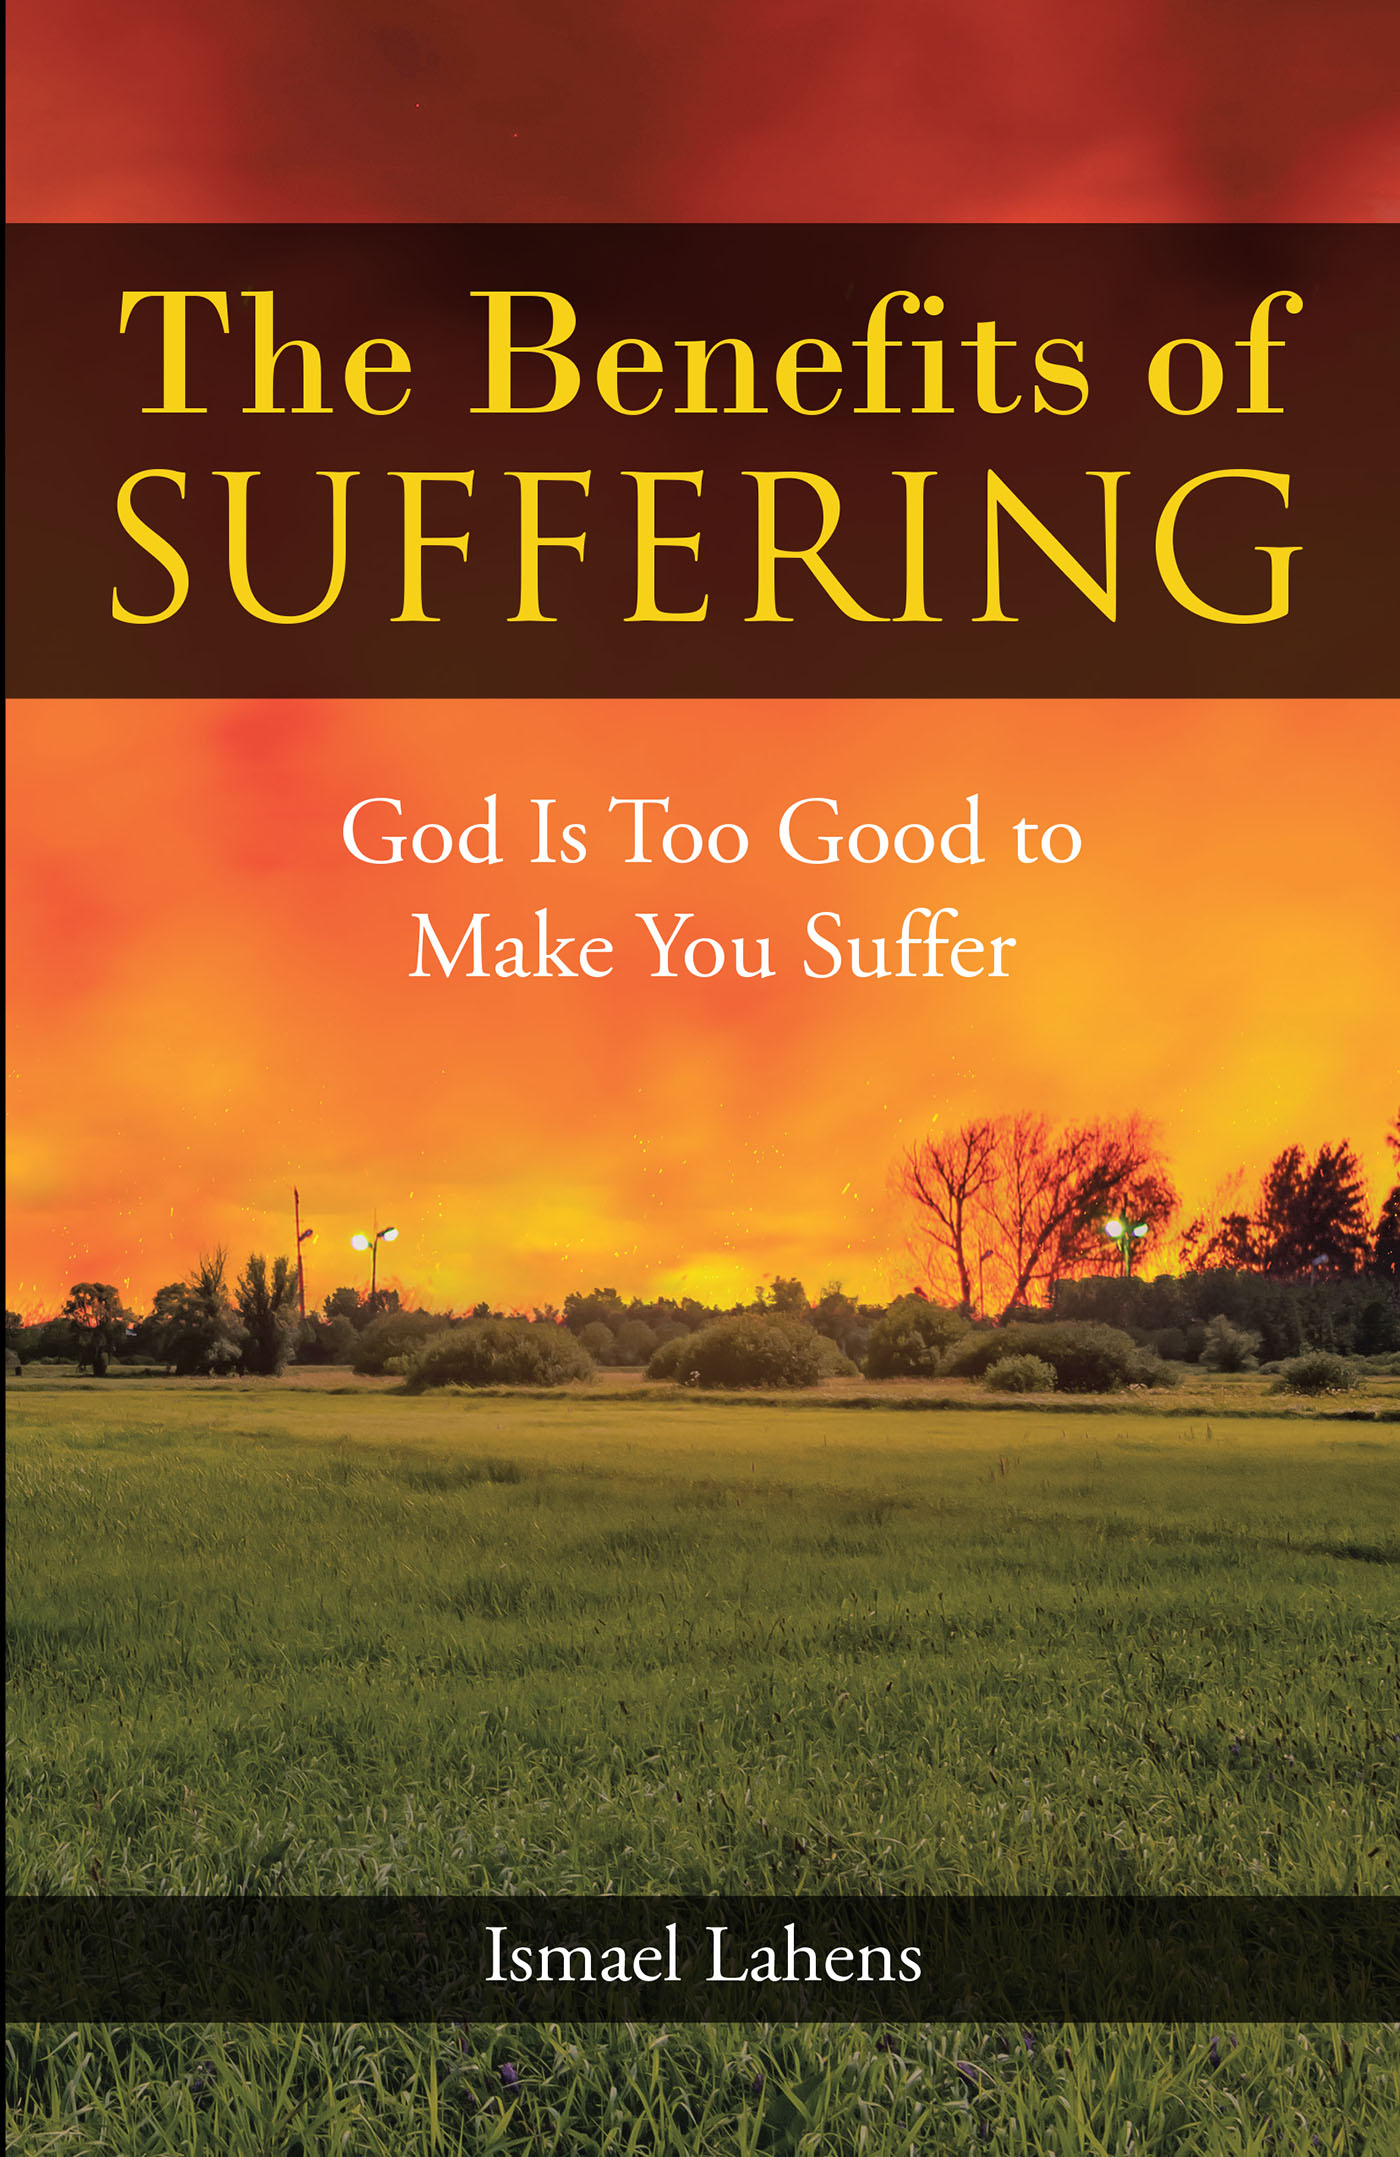 Ismael Lahens’s Newly Released “The Benefits of Suffering: God Is Too Good to Make You Suffer” is a Thoughtful Discussion of the Blessings in the Lessons